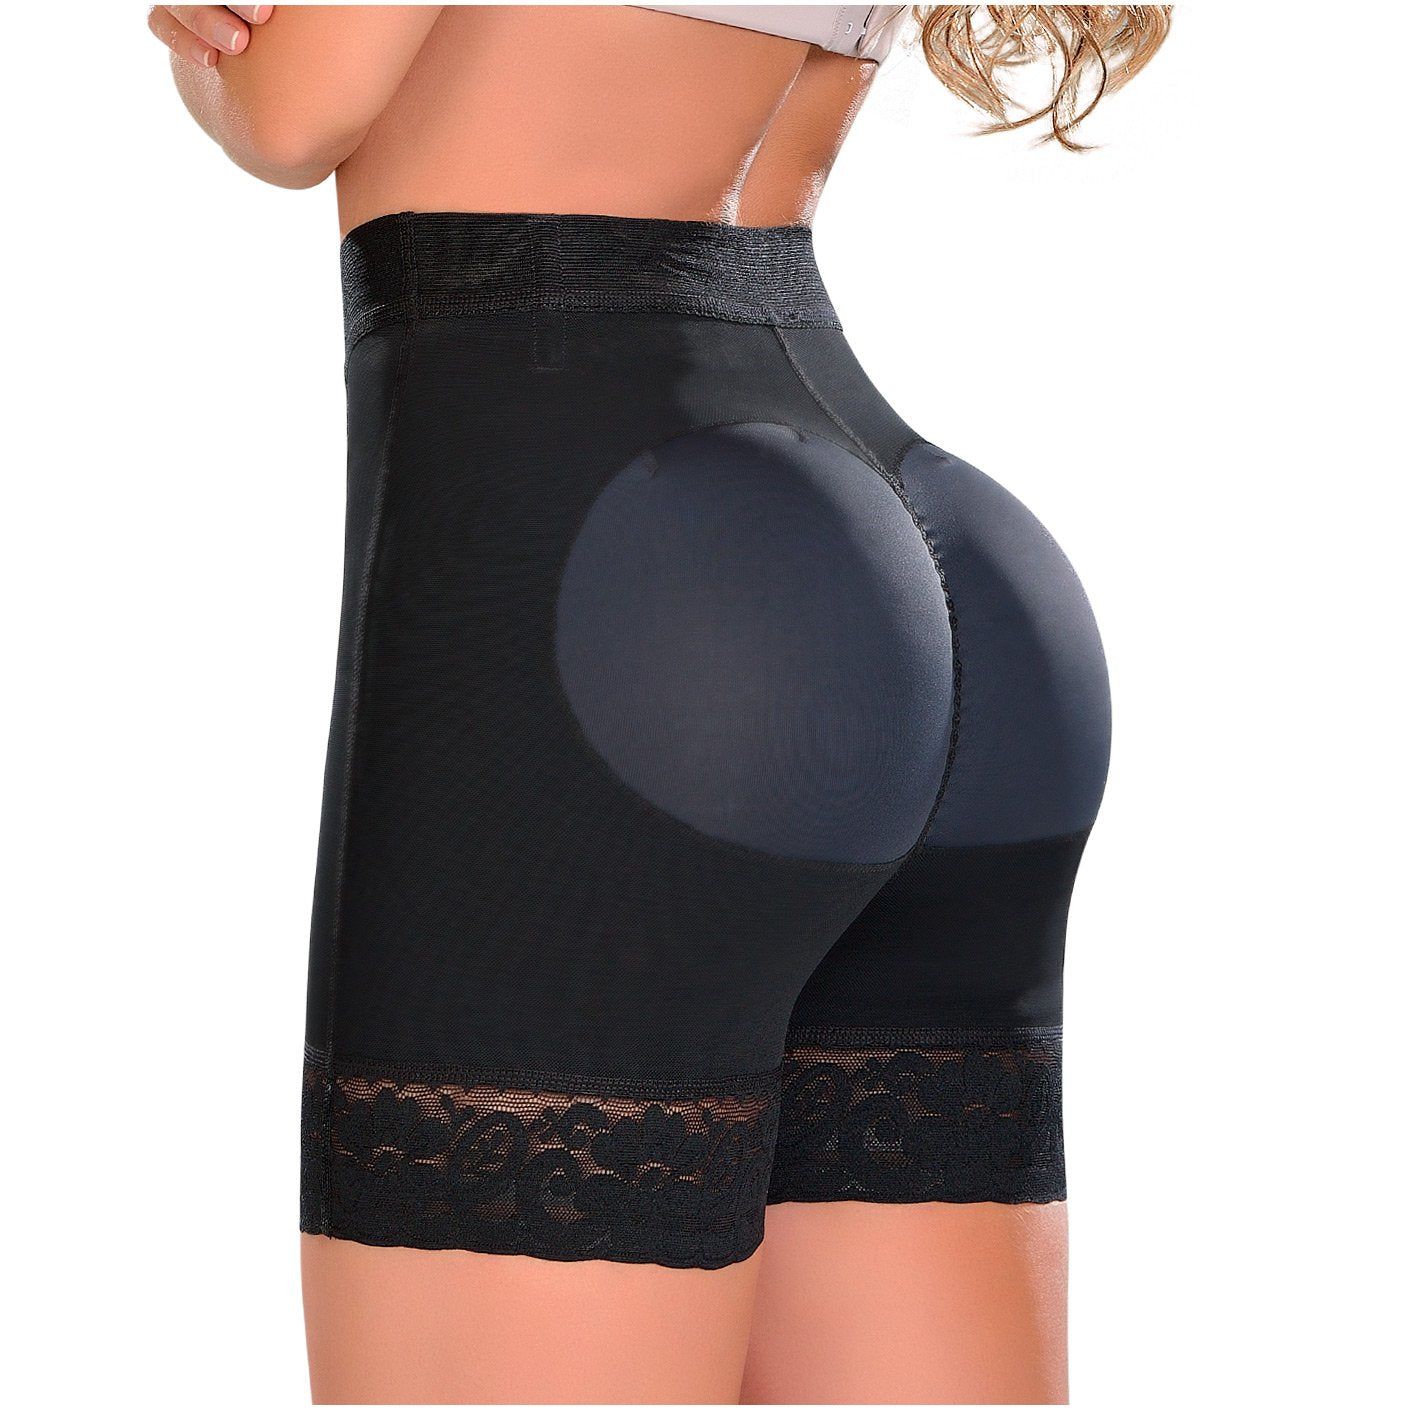 M&D Shapewear: 0321 - Shaping Compression Shorts - Showmee Store